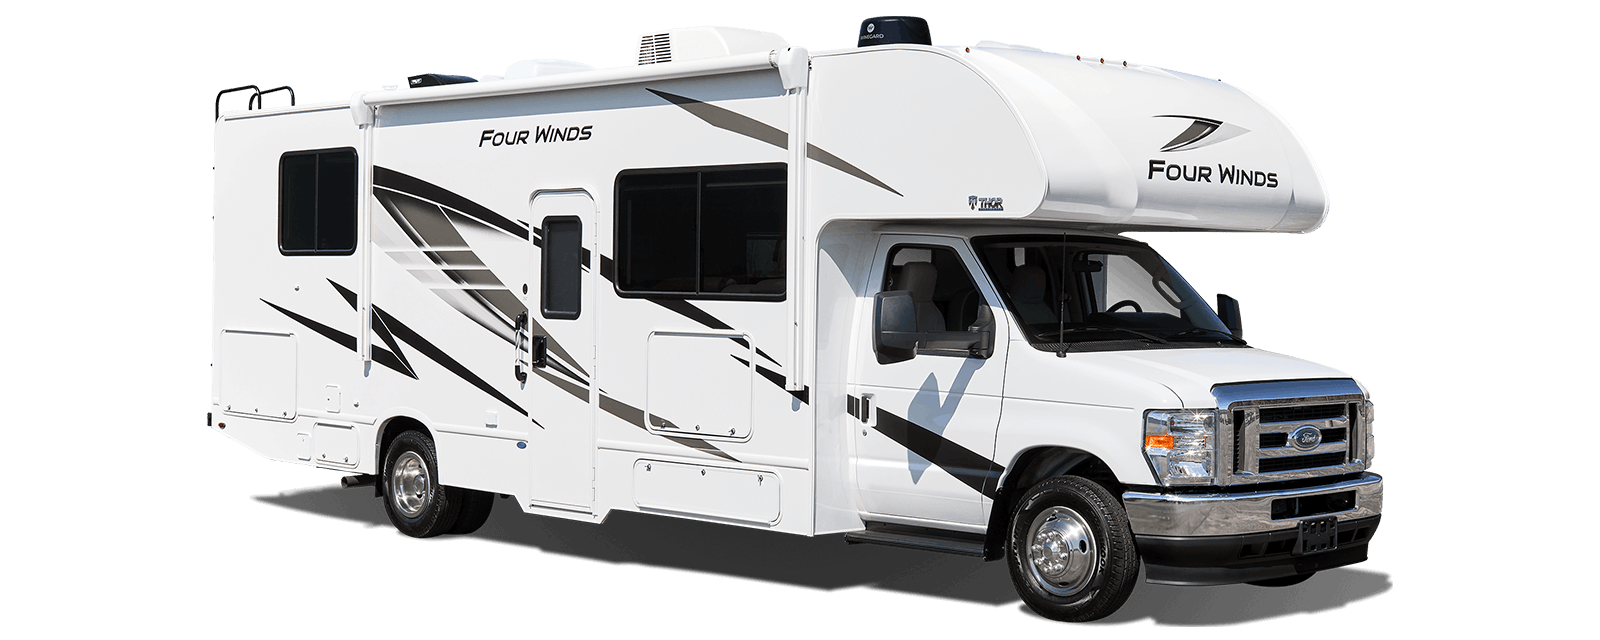 https://images.prismic.io/thormotorcoach/e2f72319-d560-4b54-bf38-4b47545caaad_four-winds-silver-stream-exterior-3Q.png?auto=compress,format&rect=0,0,1600,640&w=1600&h=640